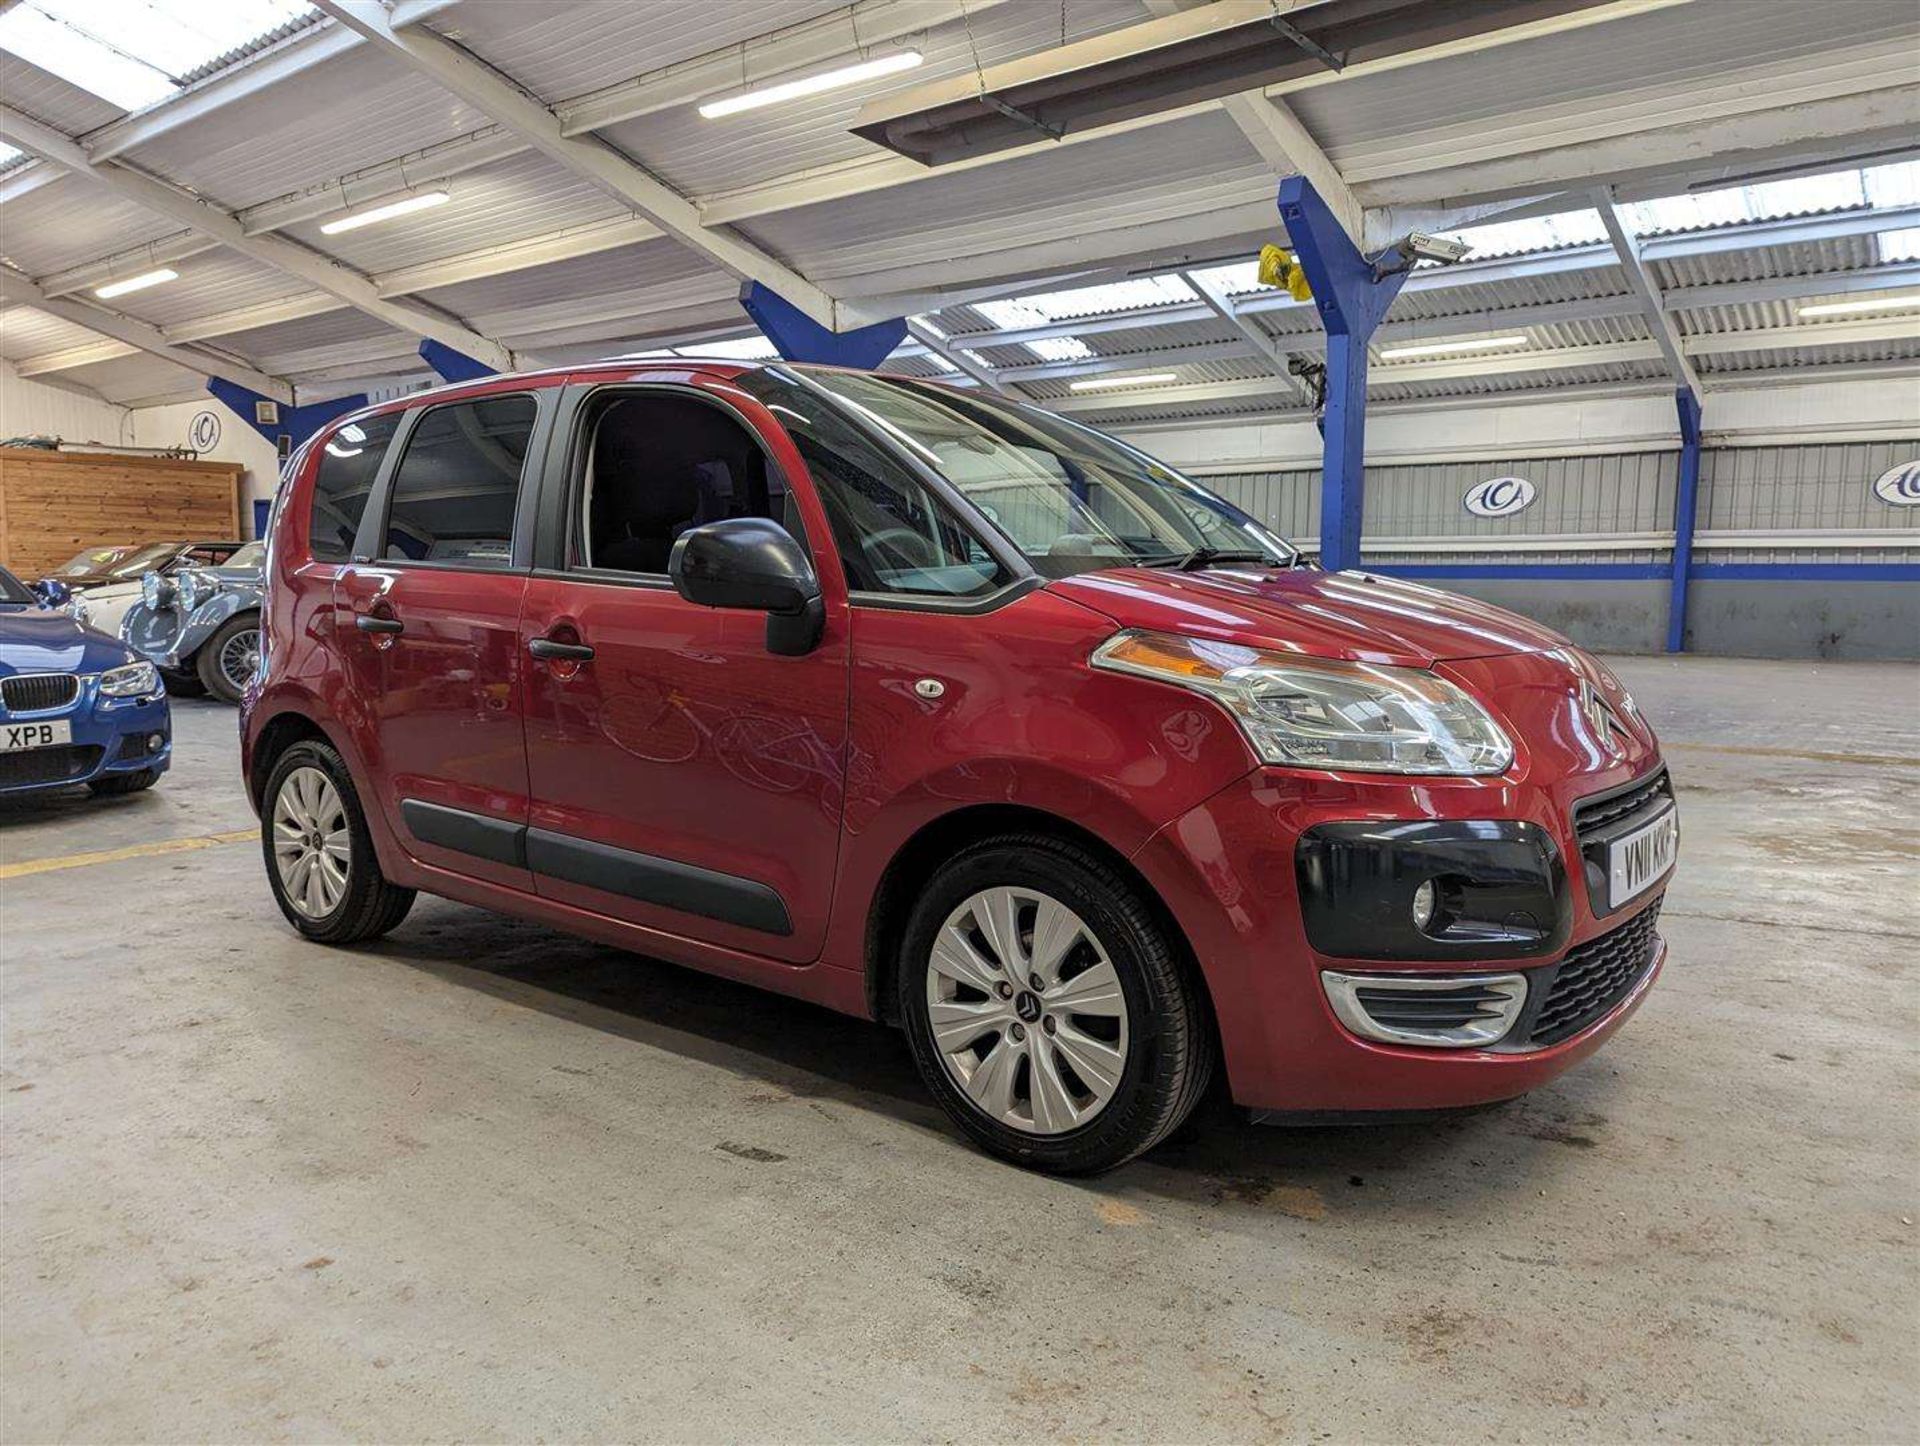 2011 CITROEN C3 PICASSO VTR+ HDI - Image 11 of 28